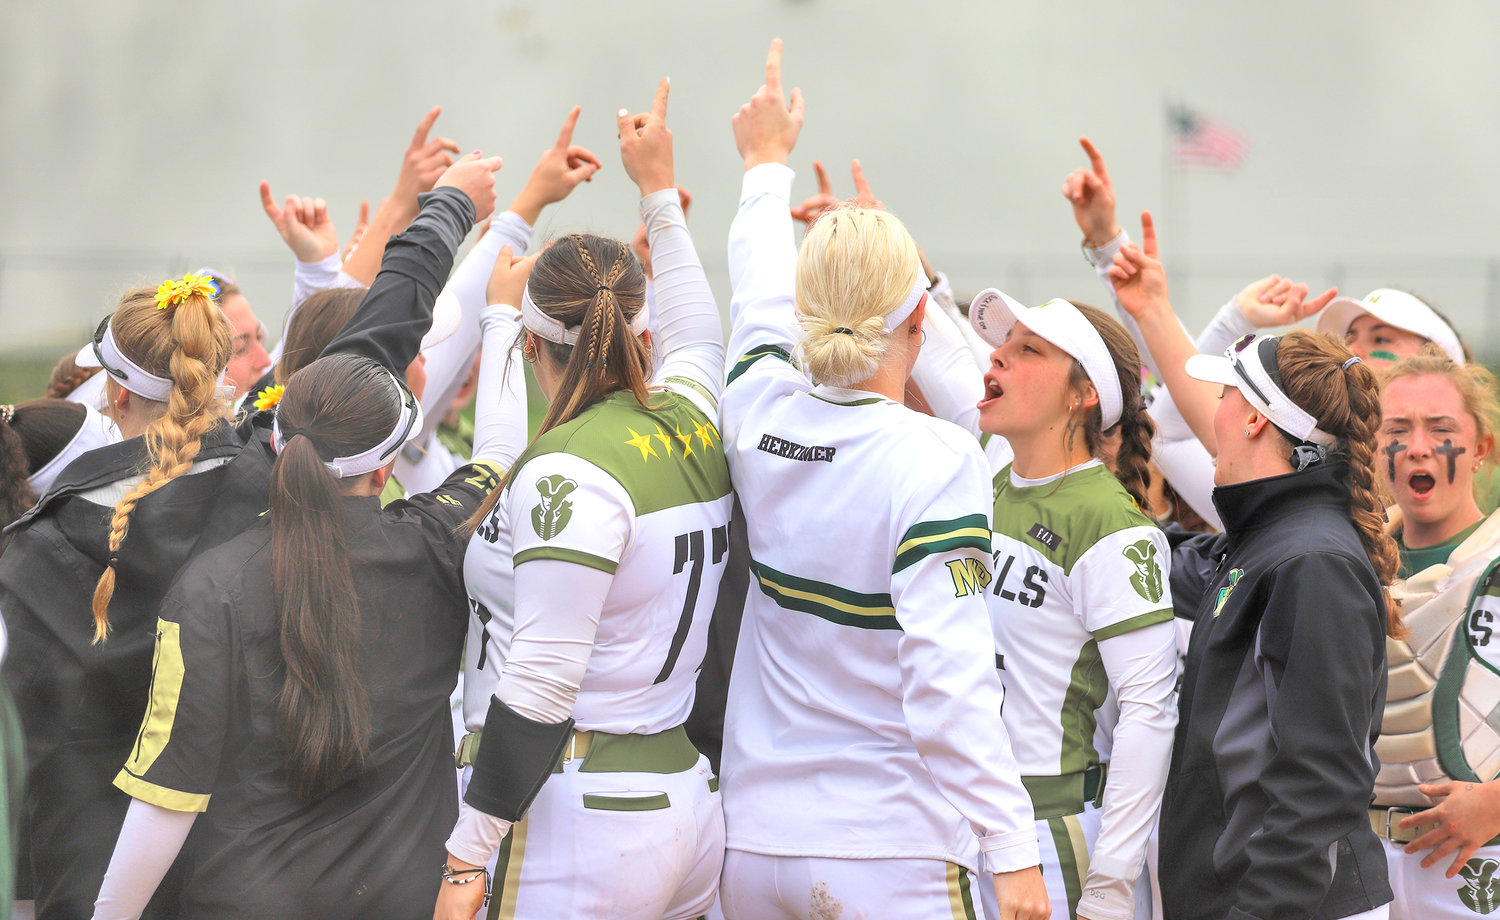 The Herkimer College softball team takes on Brookdale Community College today in the NJCAA Division III national tournament in Dewitt. It’s the Generals’ 10th consecutive tournament appearance. The team has one national title.